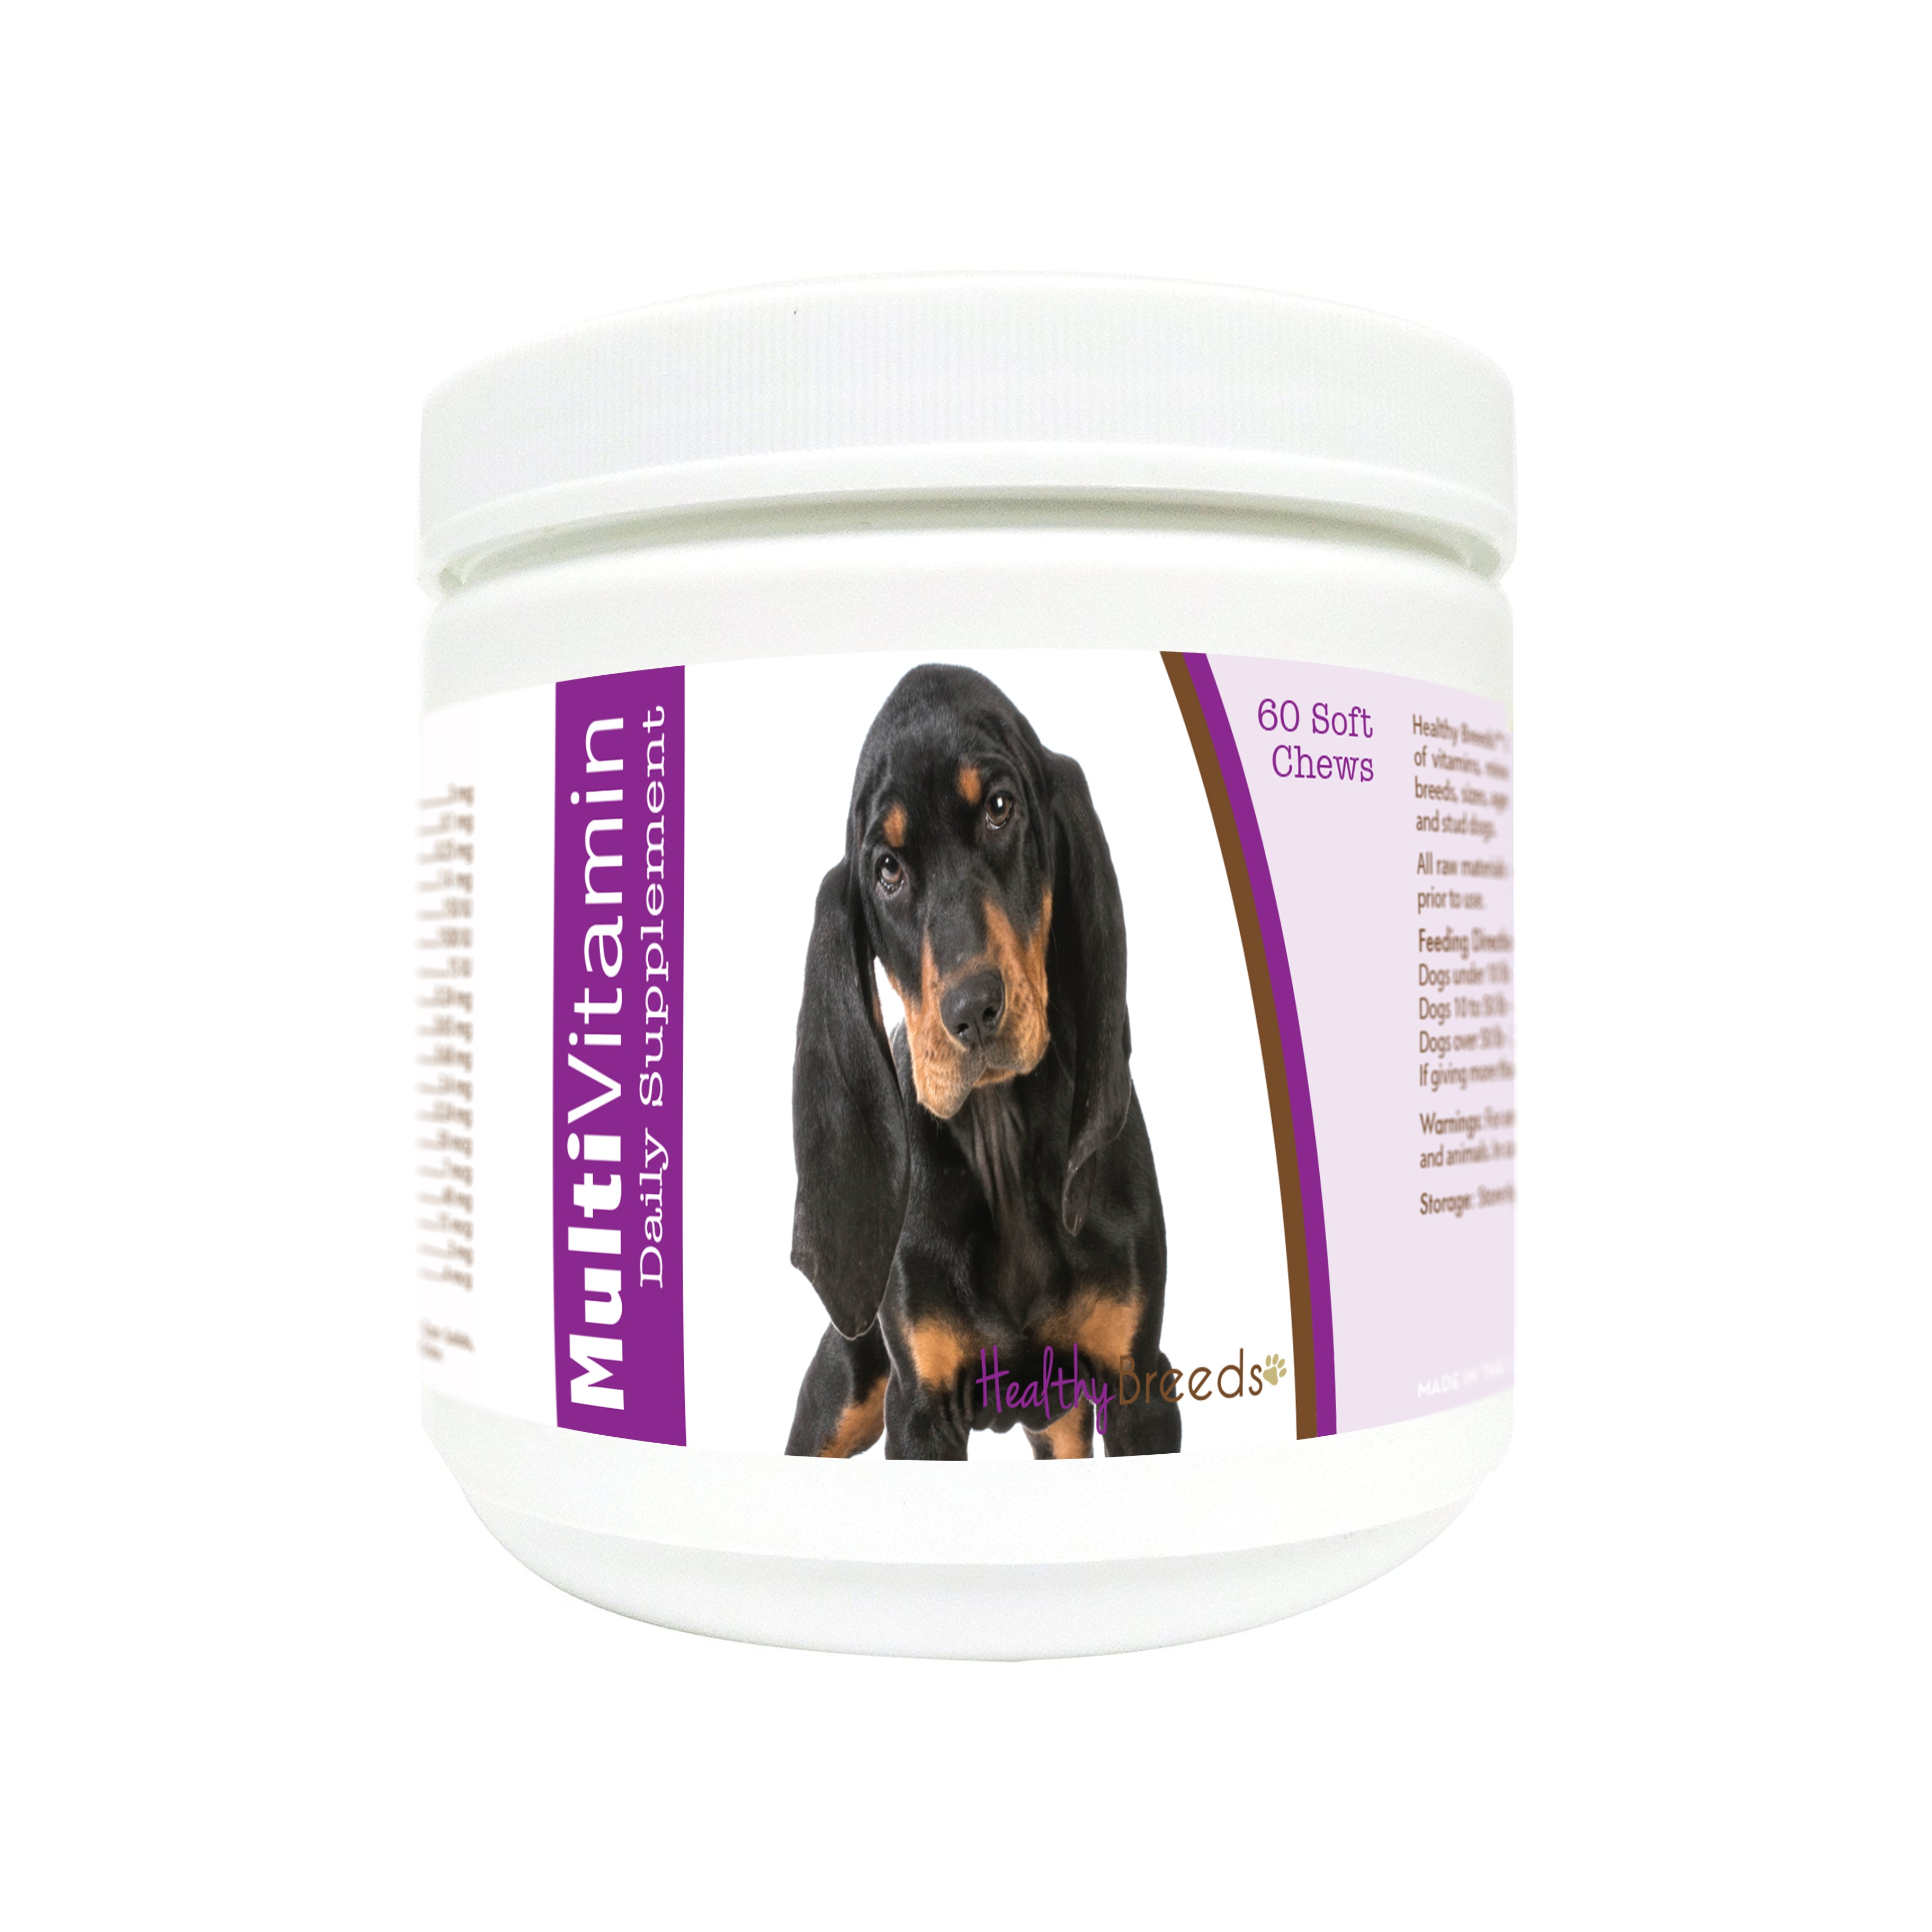 Black and Tan Coonhound Multi-Vitamin Soft Chews 60 Count